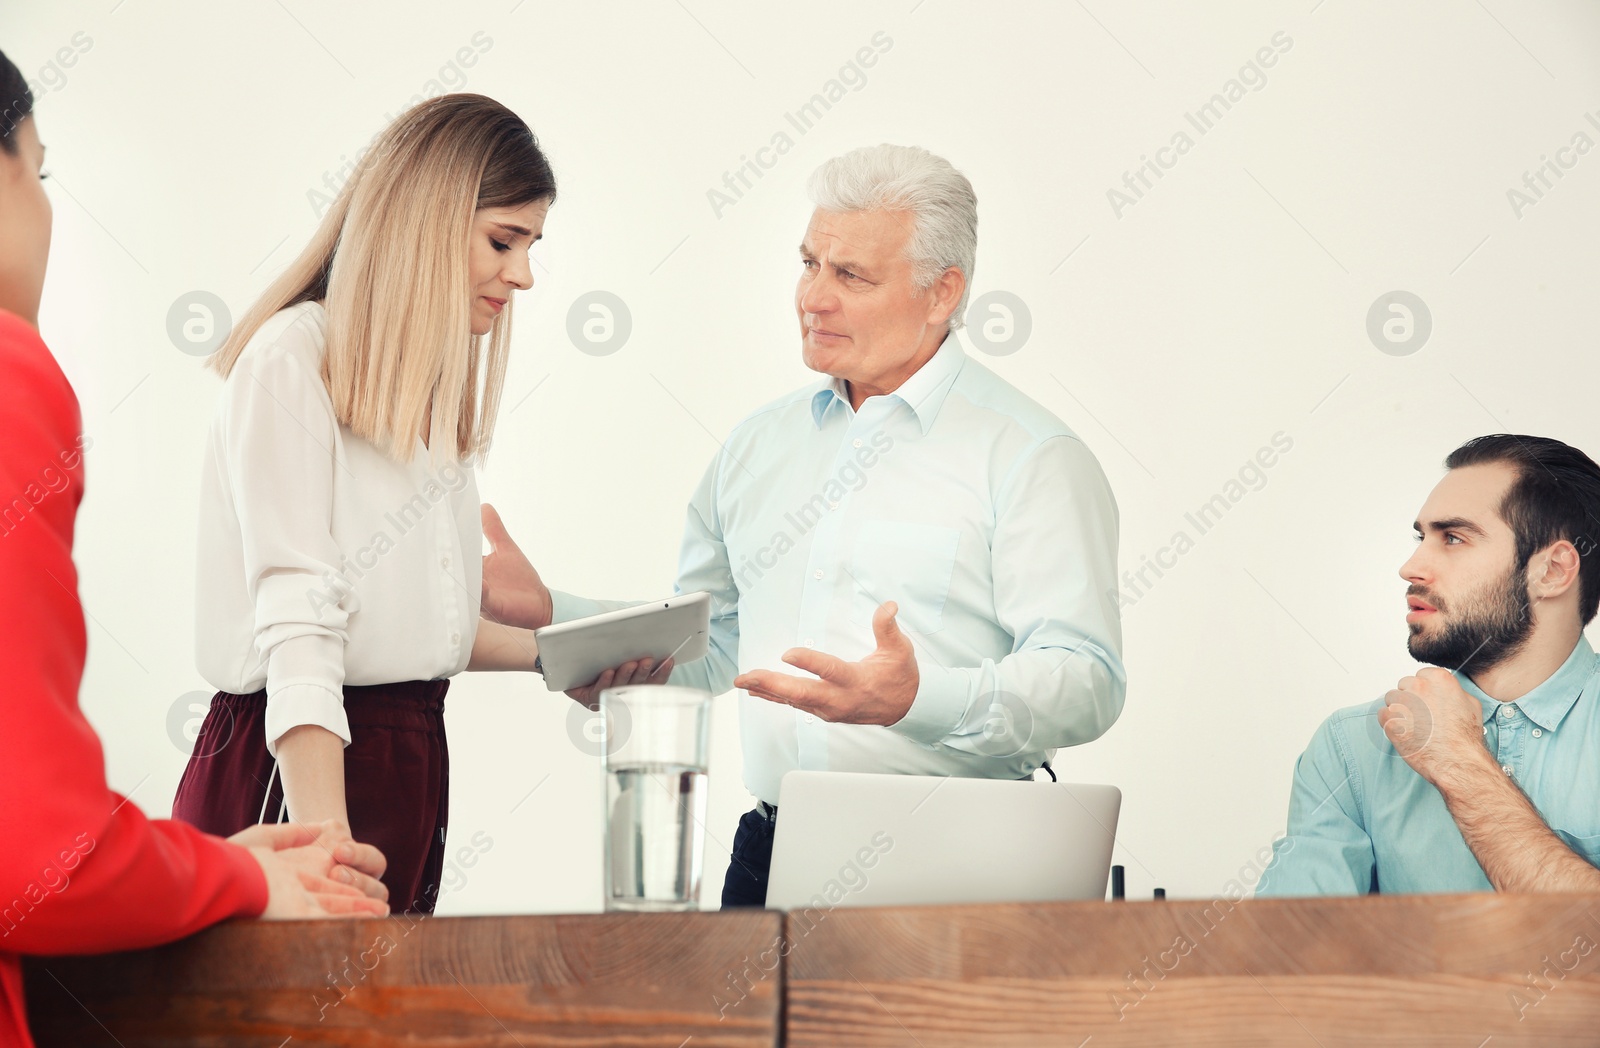 Photo of Office employees having argument during business meeting